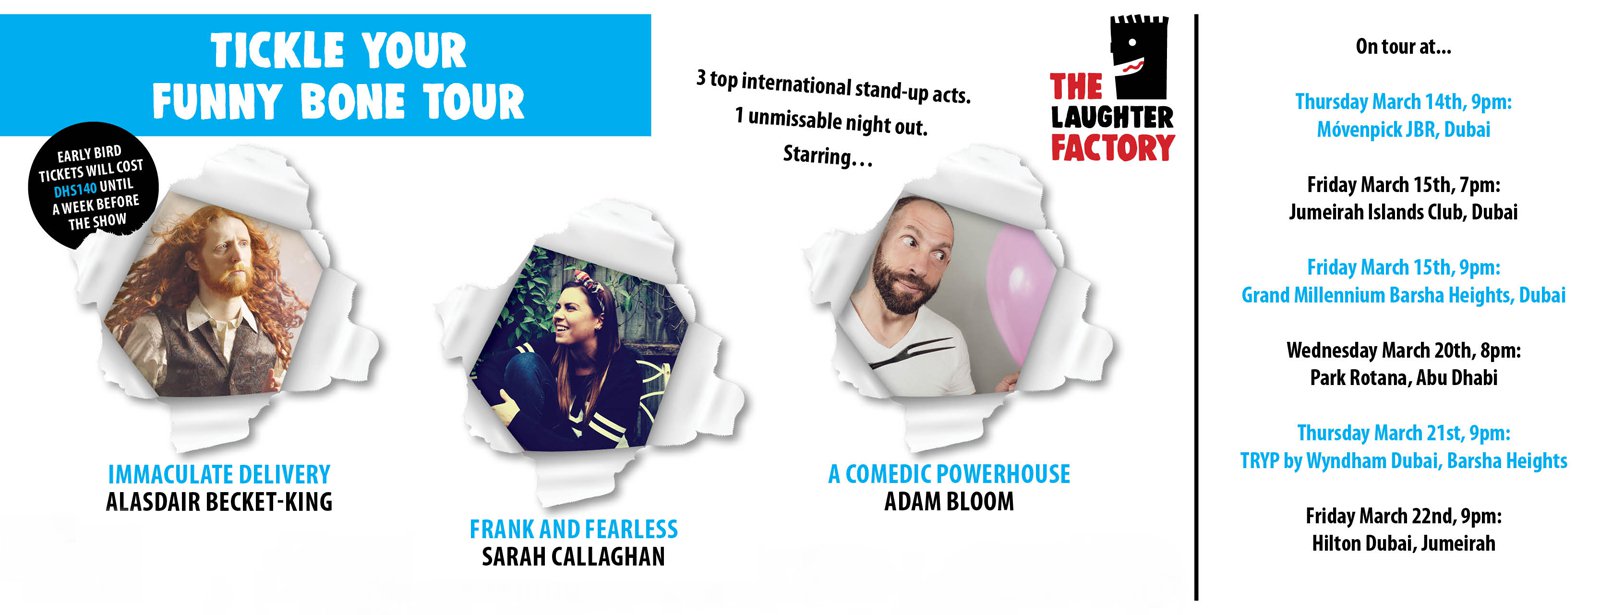 The Laughter Factory: Tickle your funny bone tour - Coming Soon in UAE